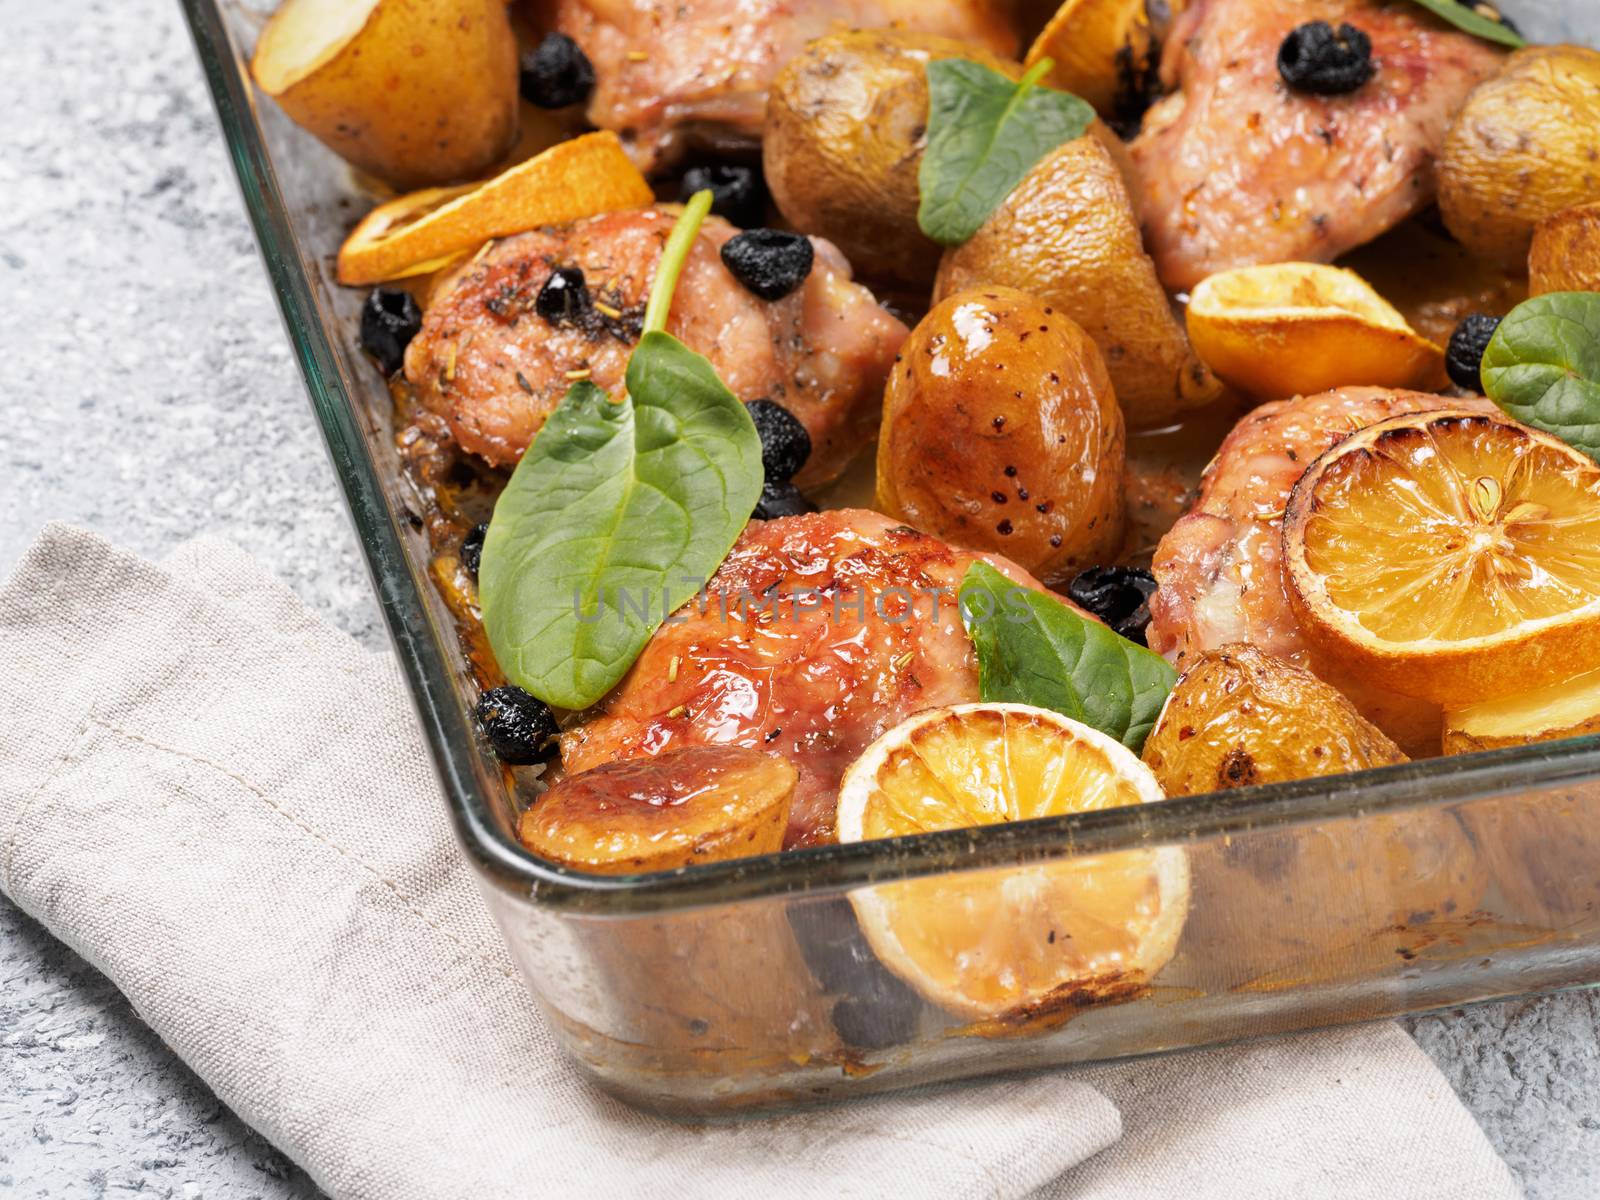 Baked chicken leg quarter with potatoes and lemon by fascinadora